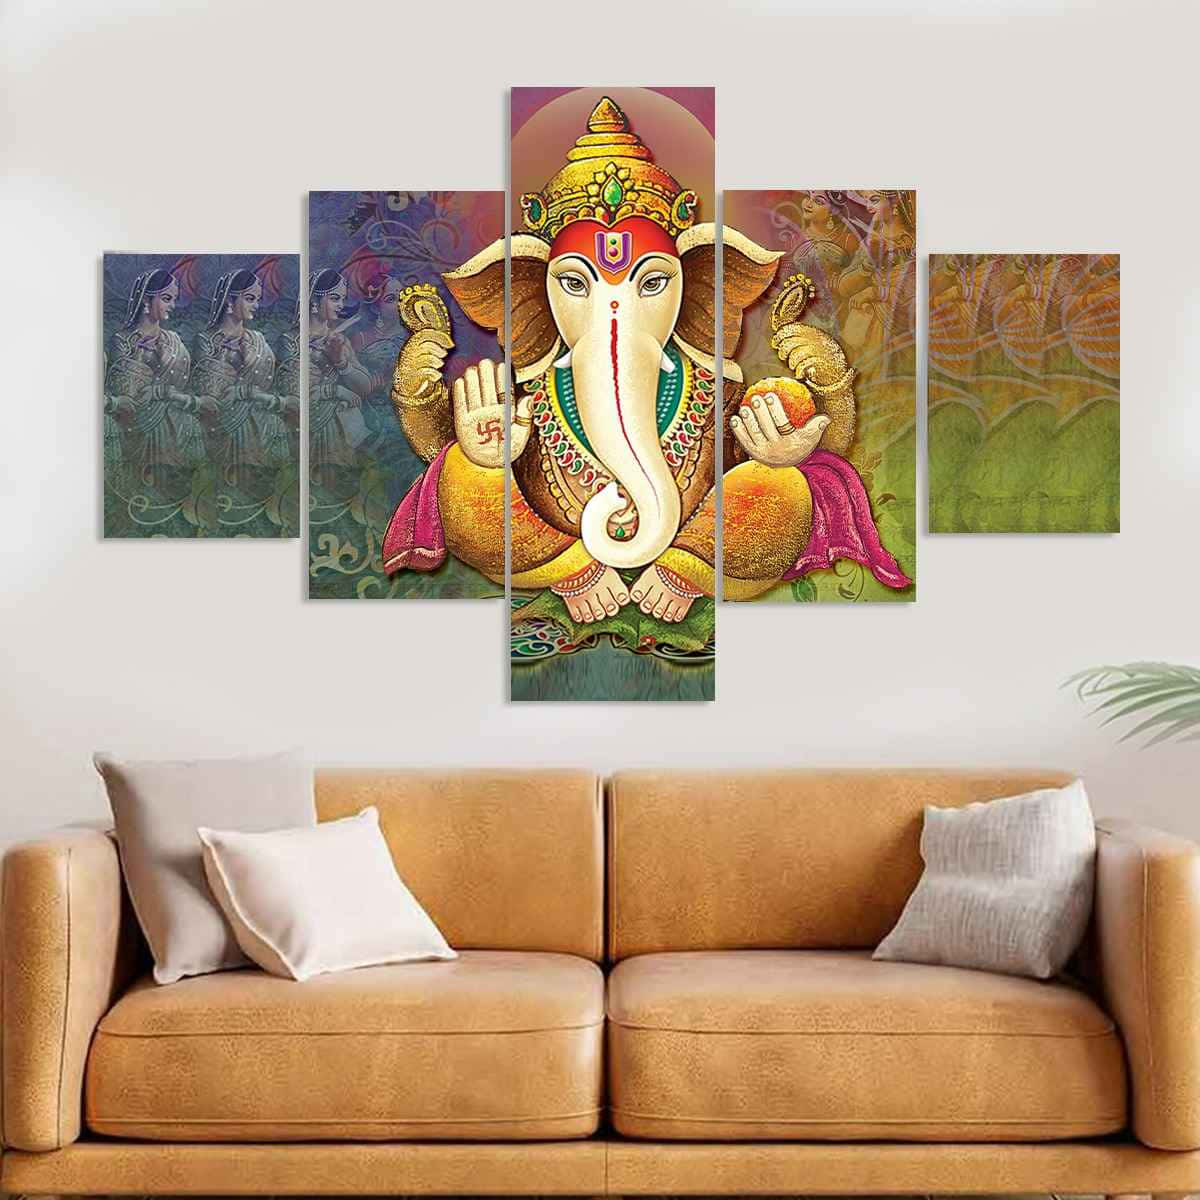 An Artistic Wall Painting Adds Sophistication To Any Room